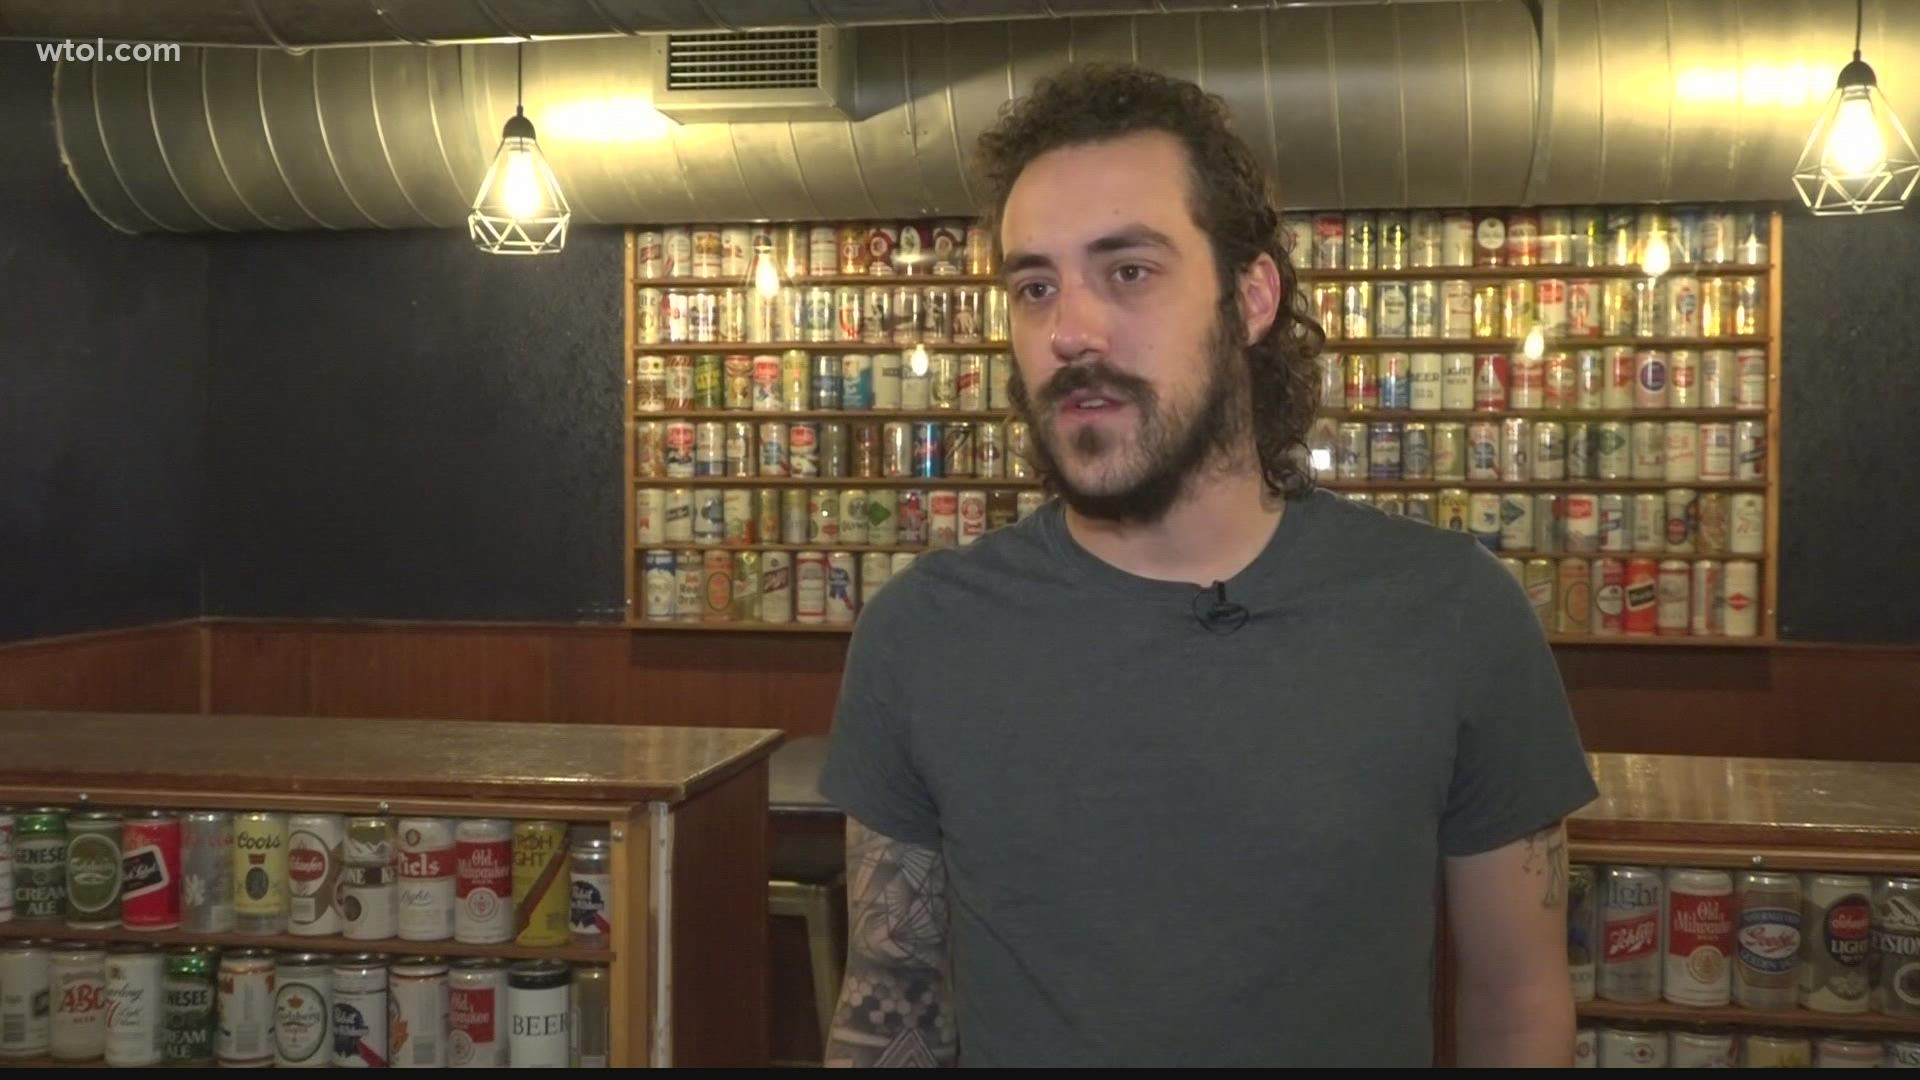 "Luckily I've got really really great staff here that's really committed even through all of the weirdness," said Zack Jacobs, the owner of The Ottawa Tavern.